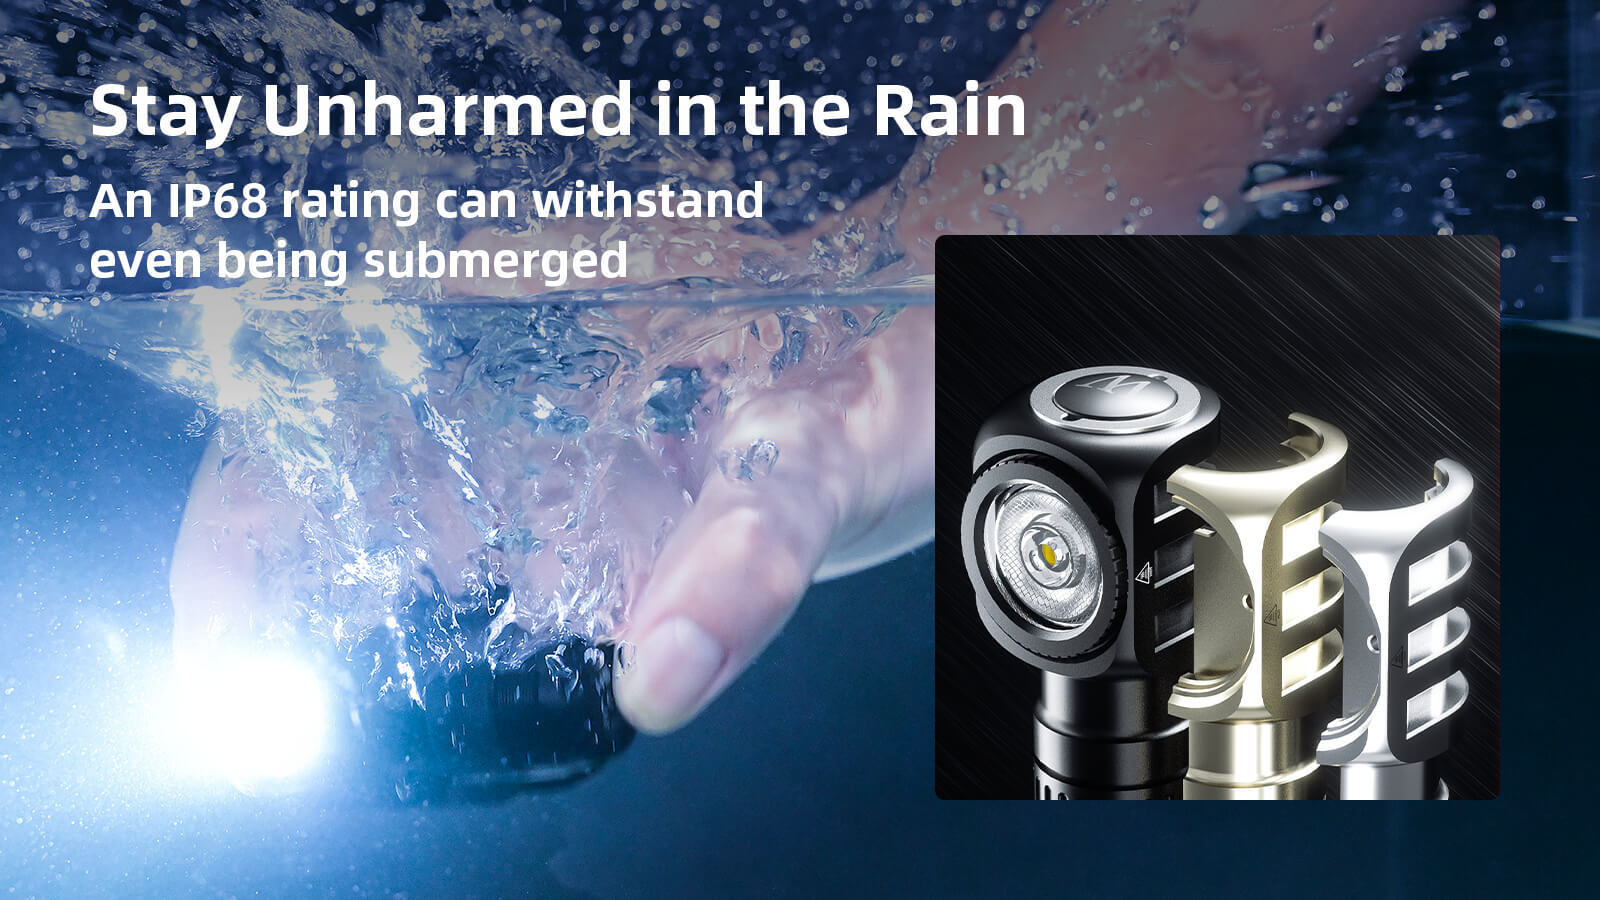 Stay Unharmed in.the Rain. IP68 can withstand even being submerged